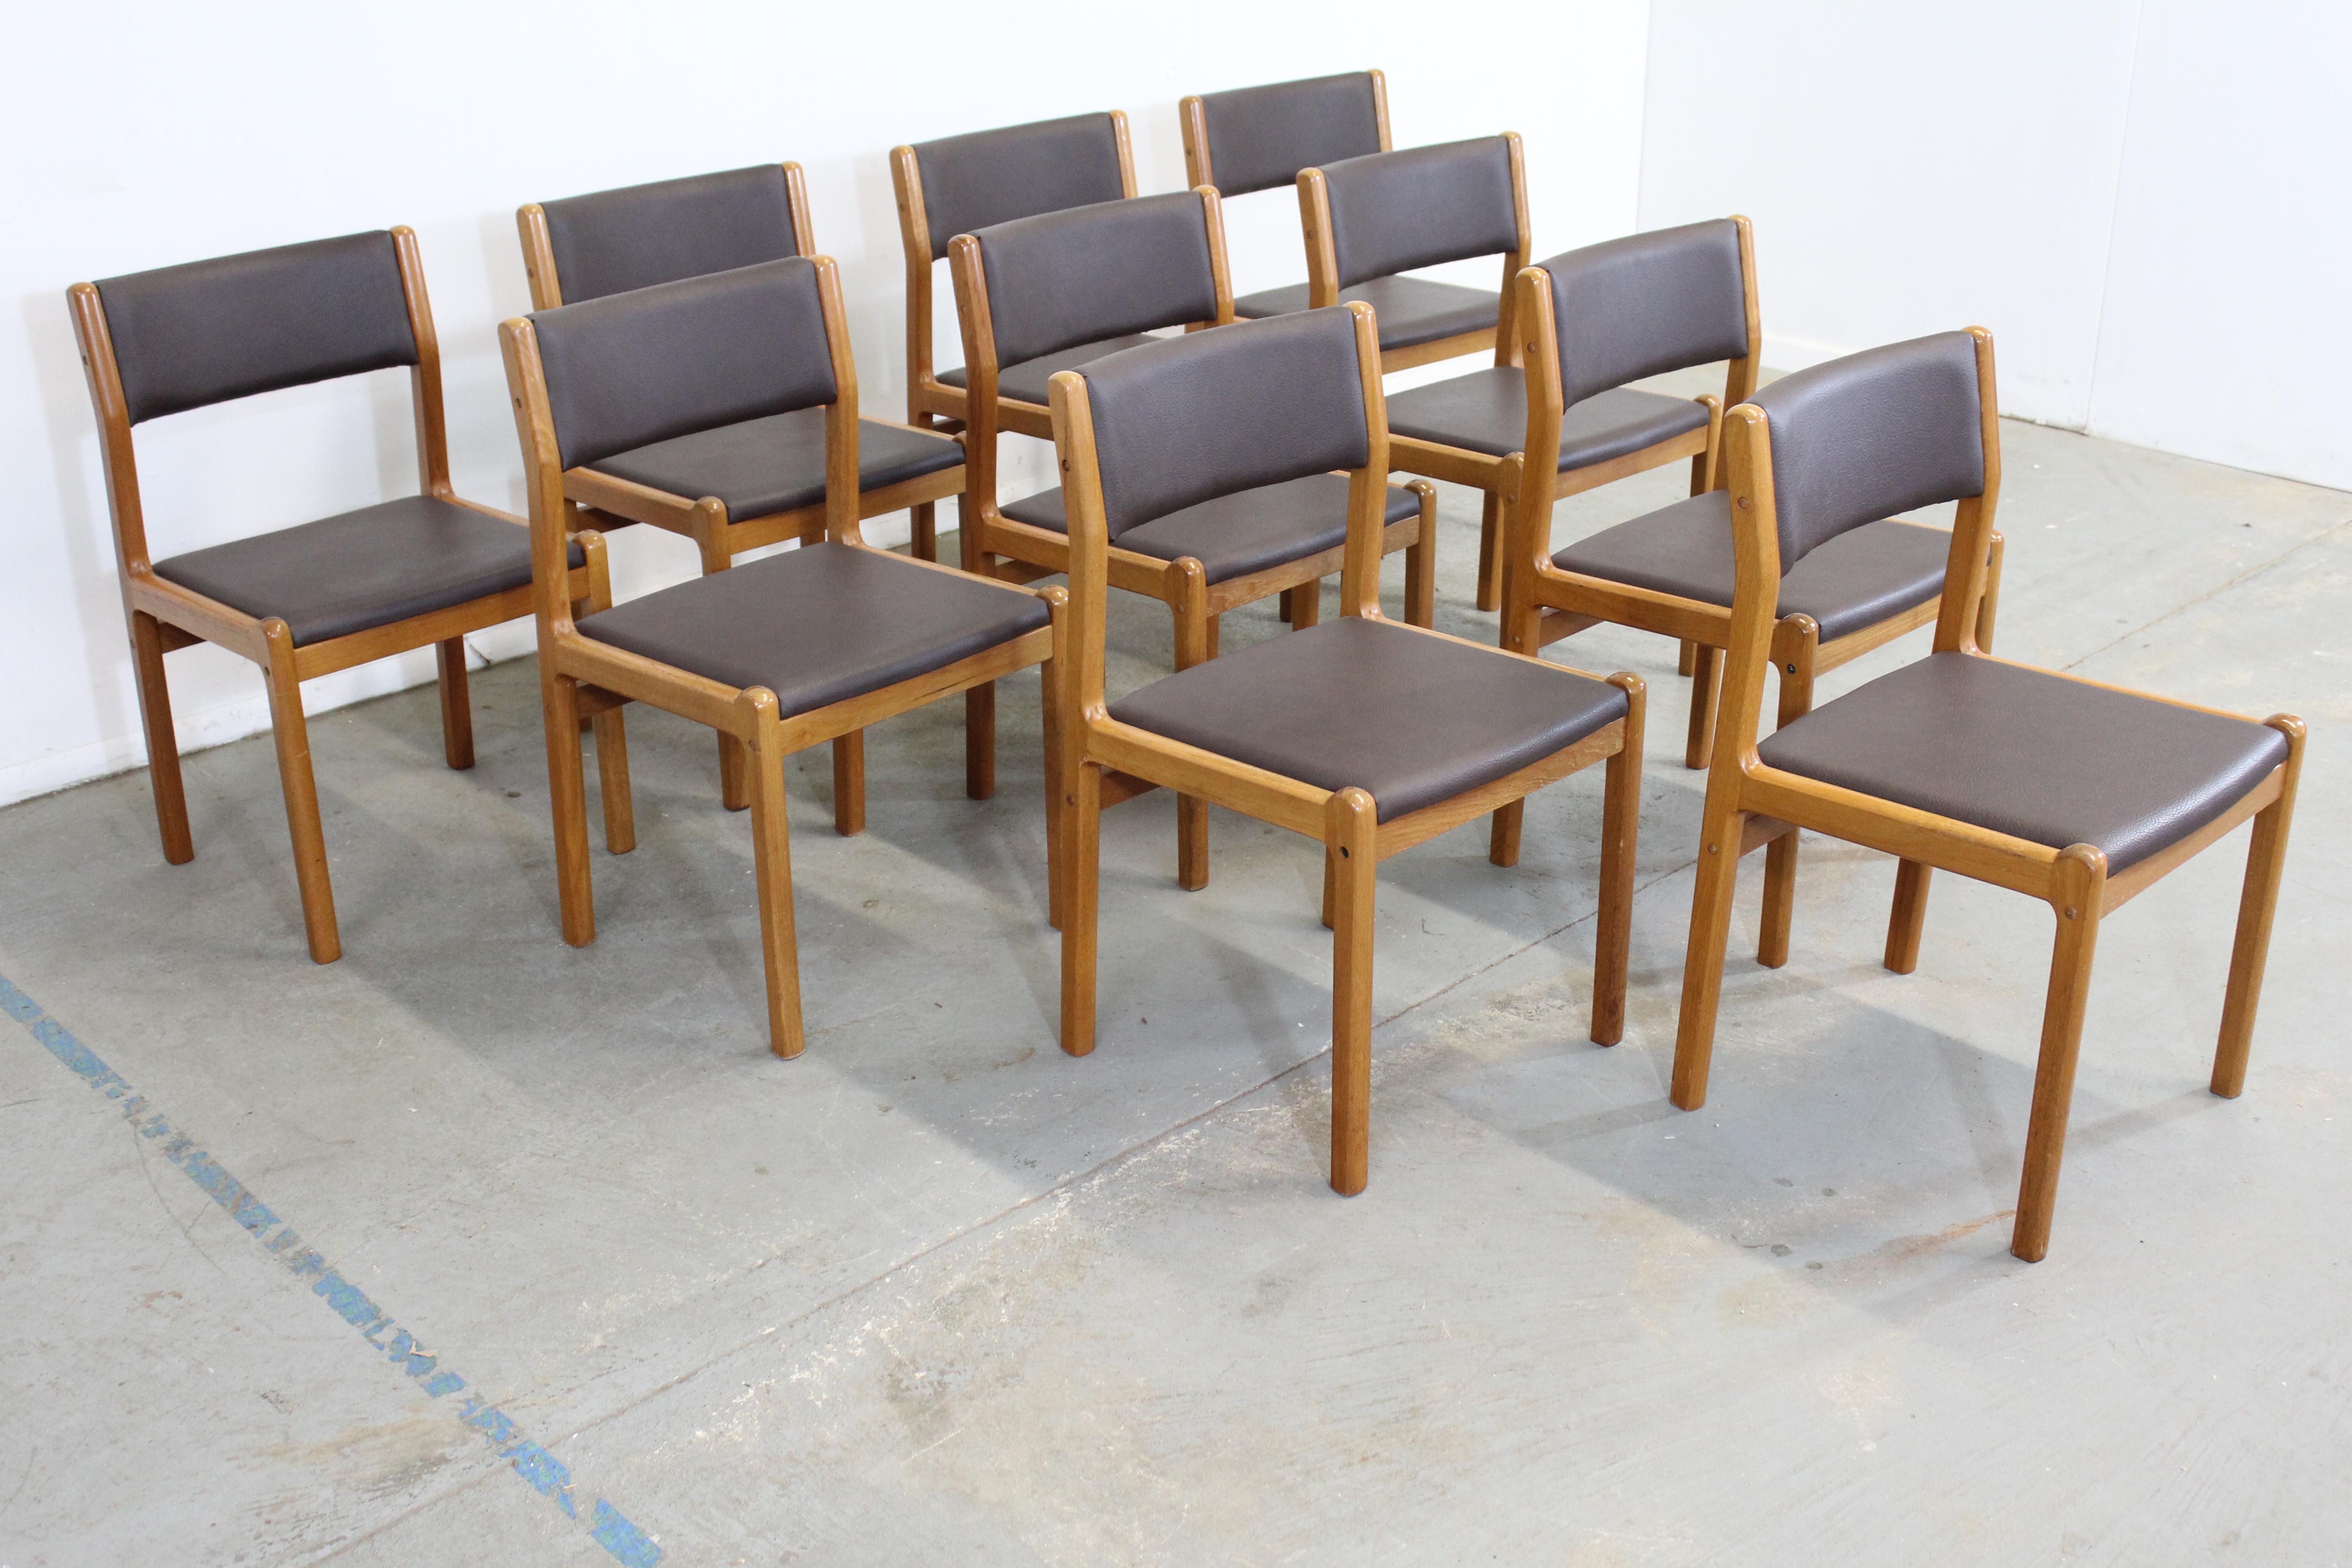 Set of 10 Mid-Century Modern teak side dining chairs 

Offered is a vintage set of Set of 10 Danish Modern JL Moeller teak side dining chairs. They are in good vintage condition. Shows minor stains, surface scratches, age wear. They are